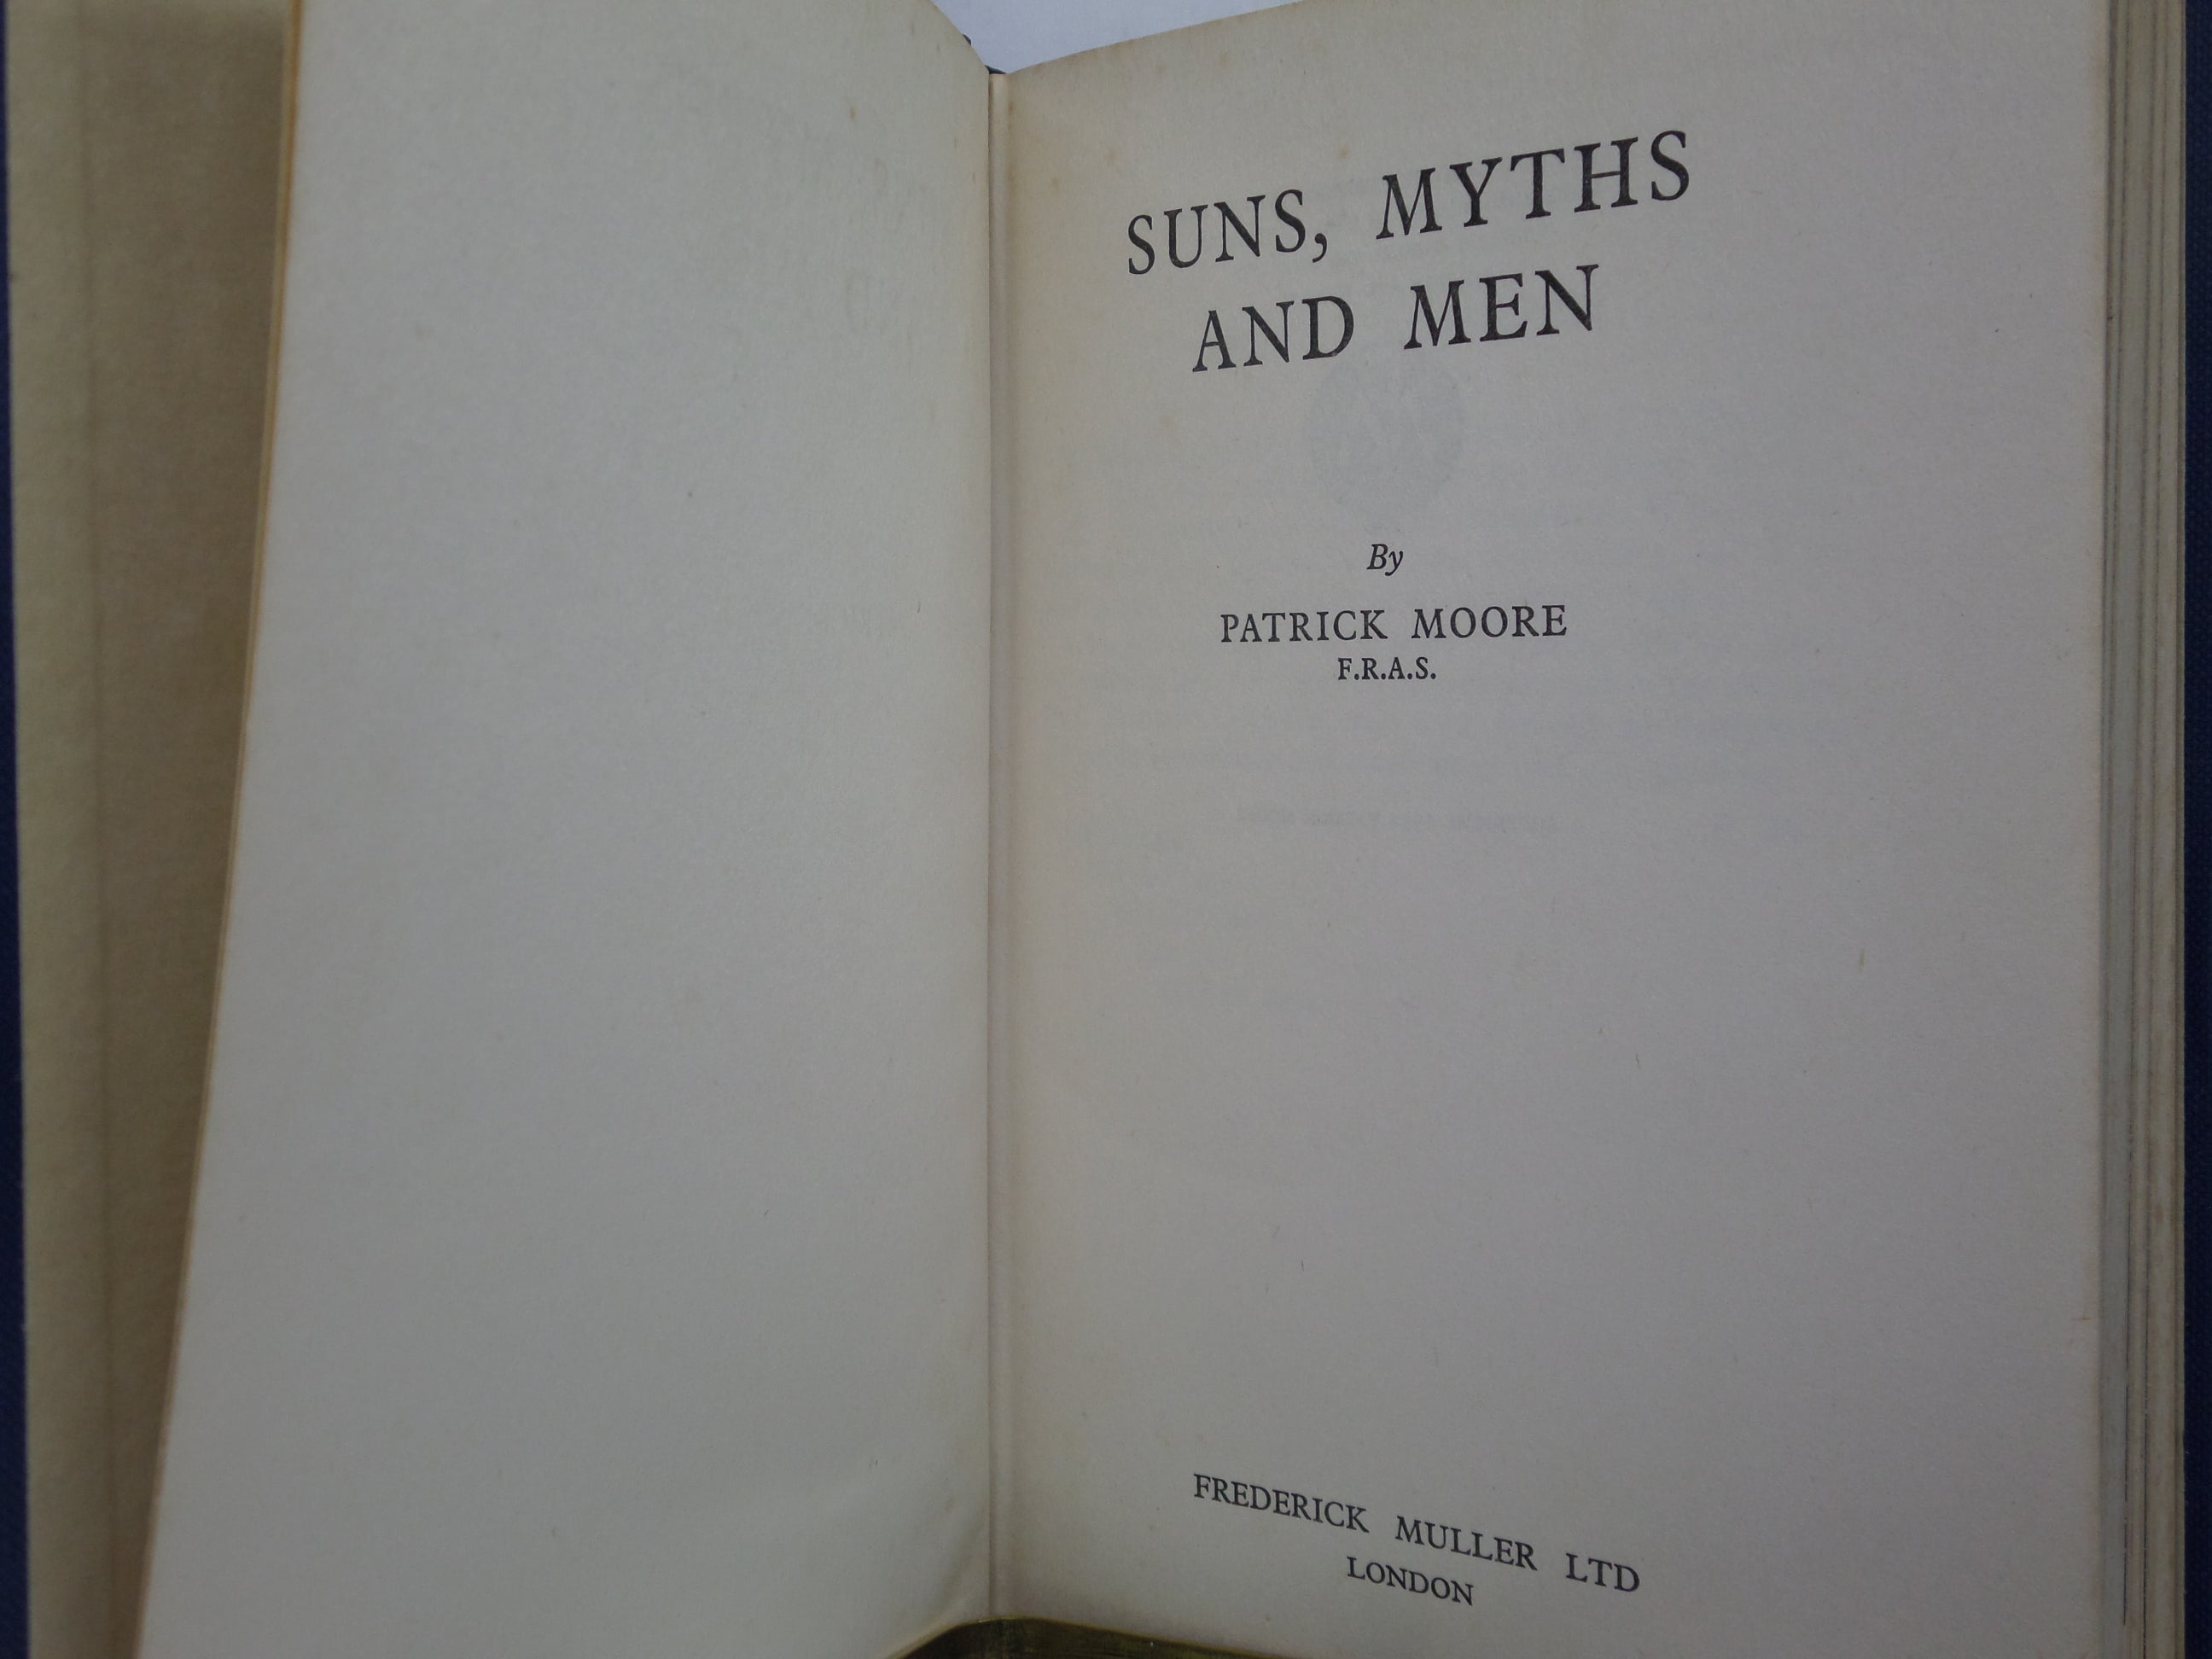 SUNS, MYTHS AND MEN BY PATRICK MOORE 1954 RARE FIRST EDITION HARDBACK